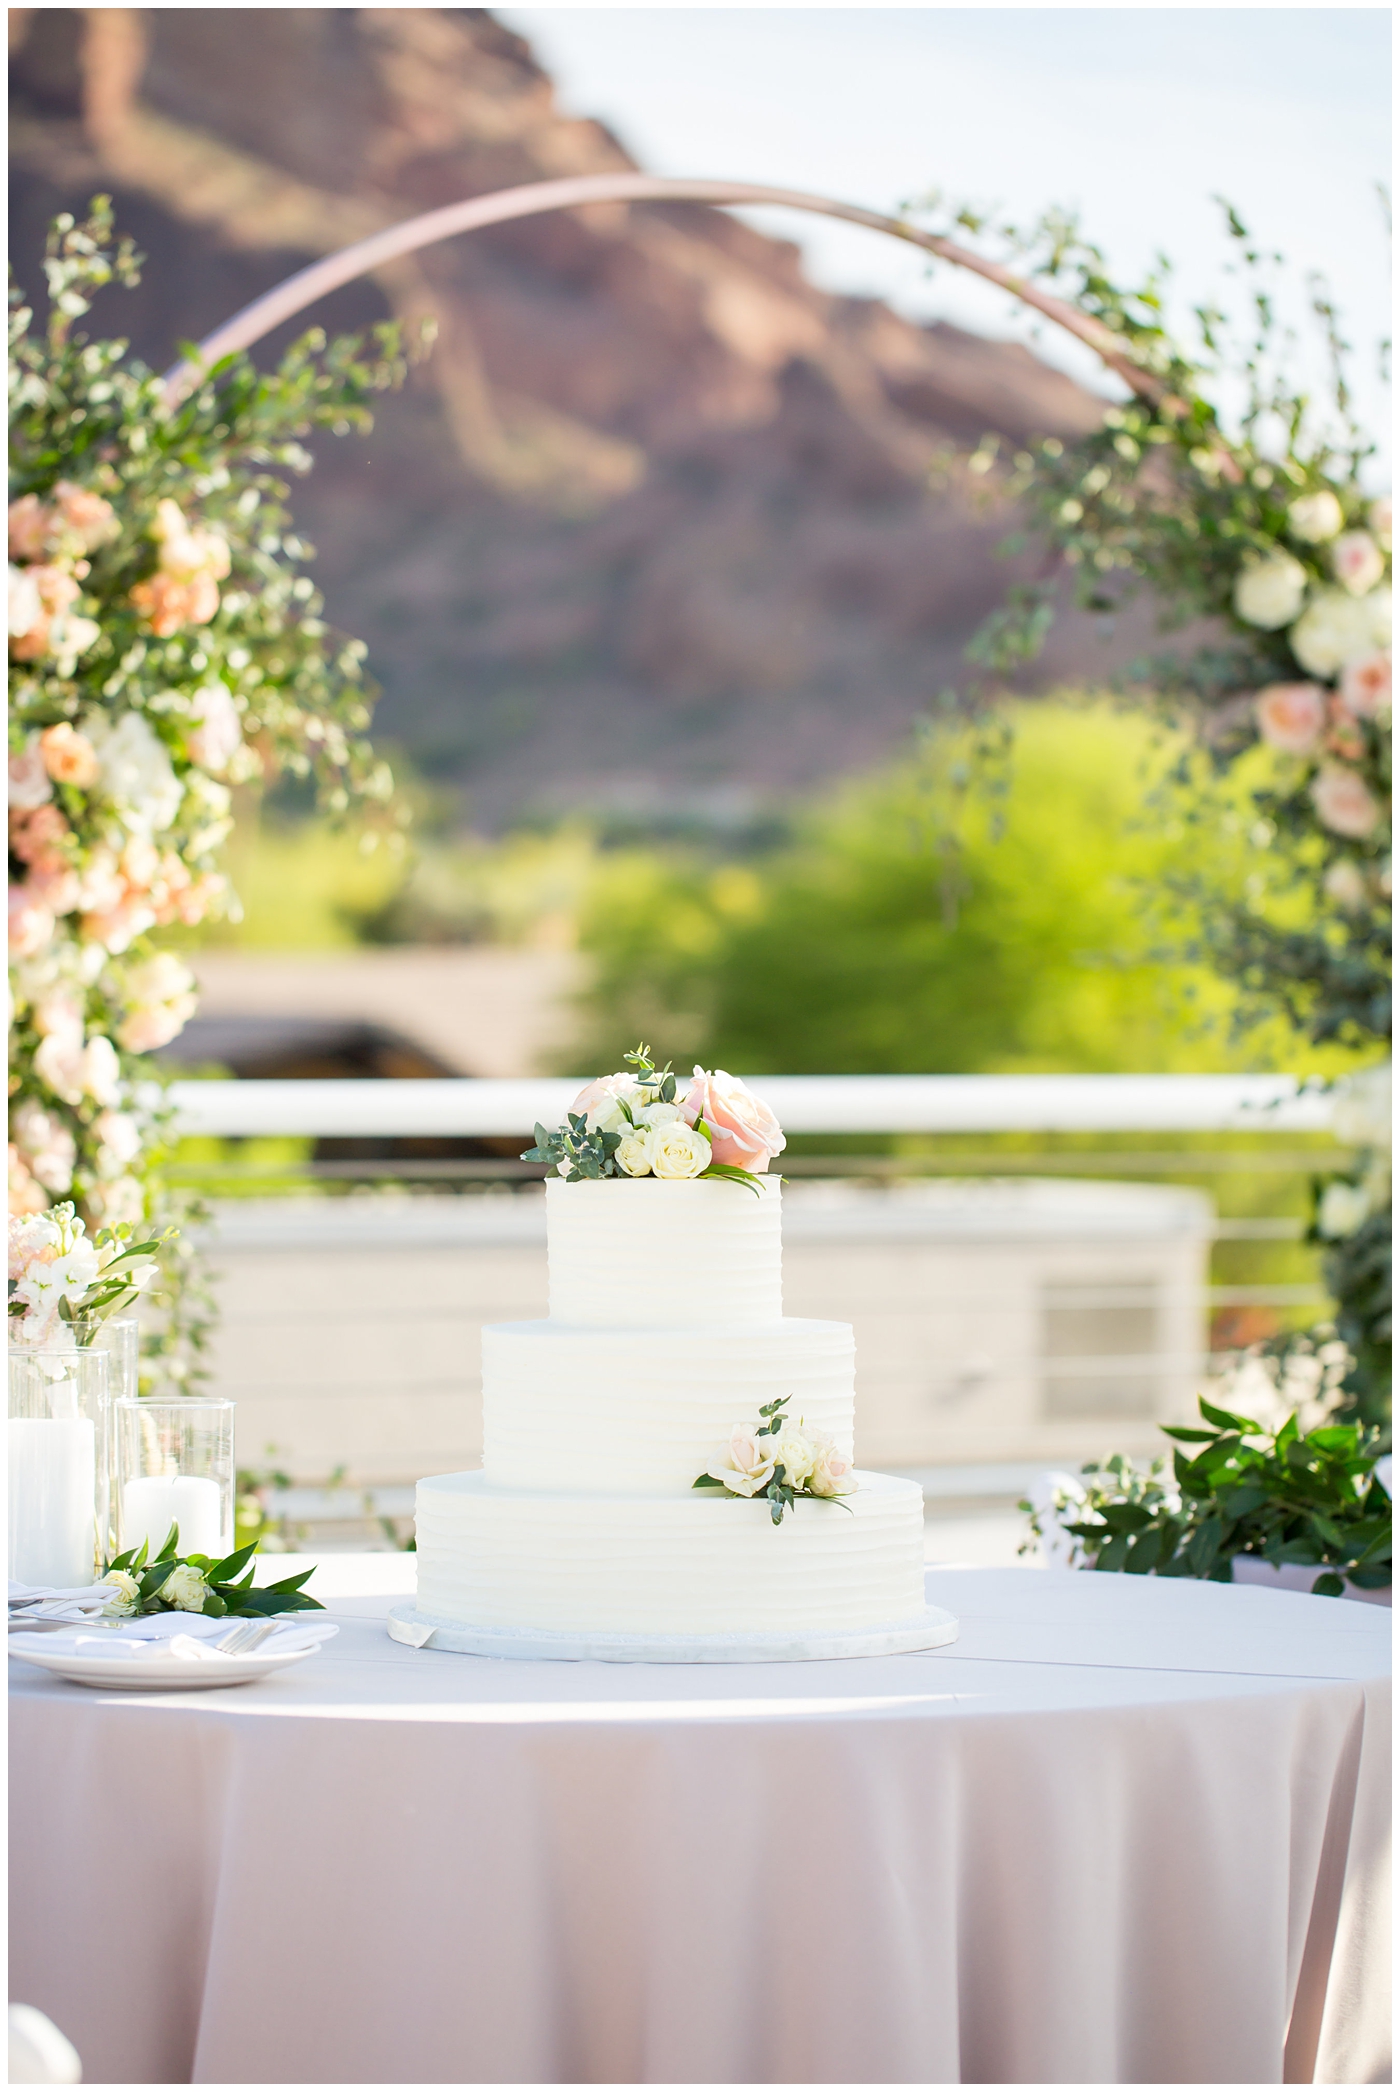 unique circle arch for ceremony with wildflowers in blush and white with greenery at outdoor rooftop wedding reception with mountain in background and three tier wedding cake with white frosting and flowers for decoration